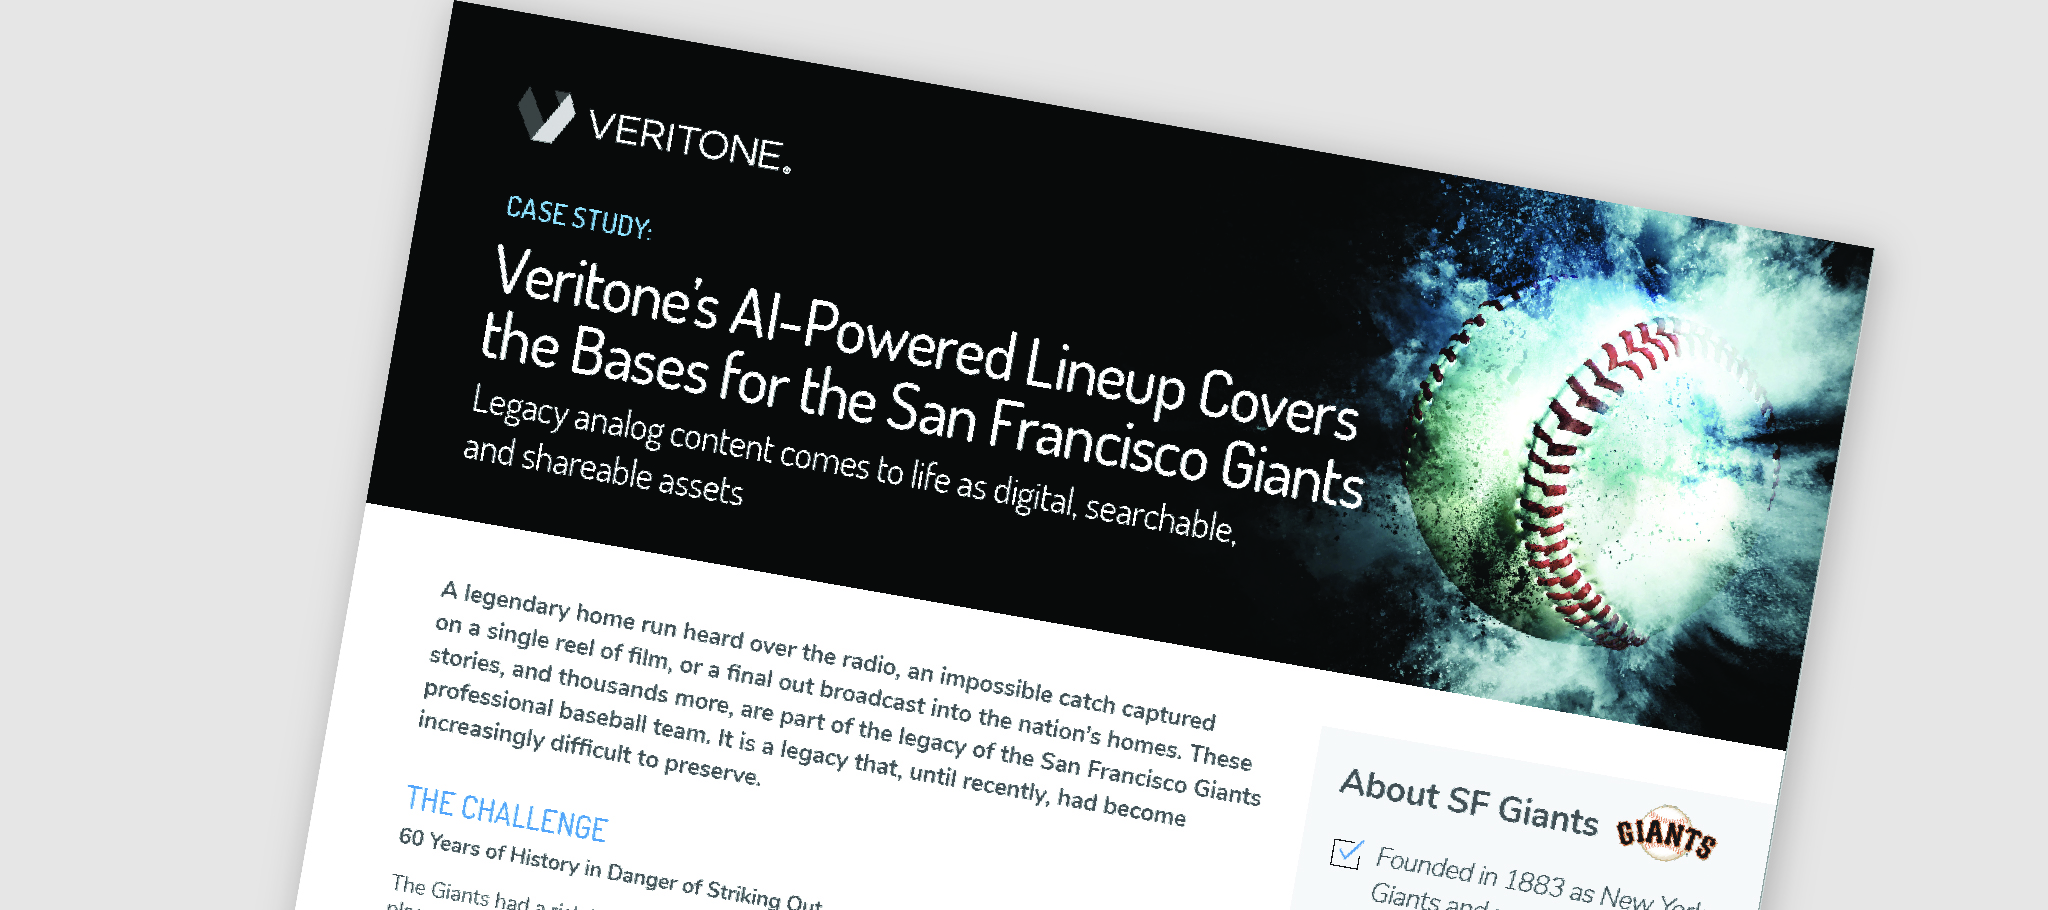 Veritone’s AI-Powered Lineup Covers the Bases for the San Francisco Giants